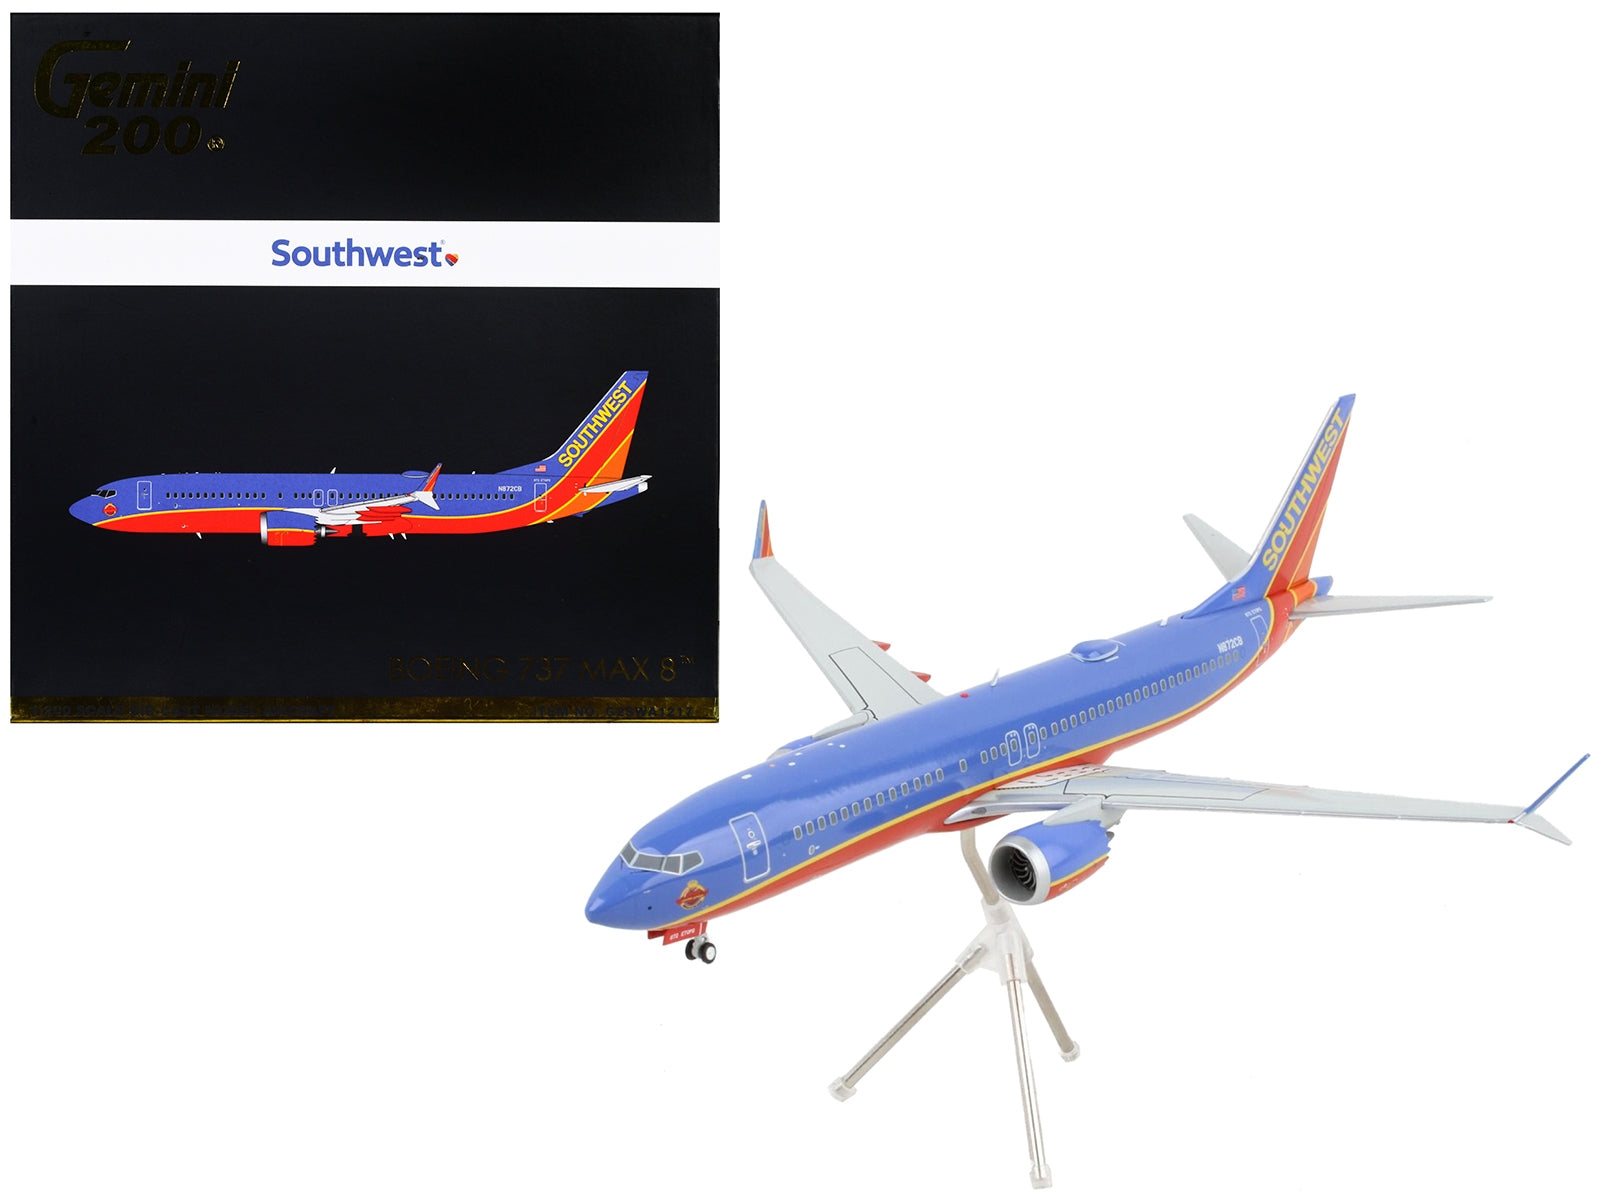 Boeing 737 MAX 8 Commercial Aircraft "Southwest Airlines" Blue and Red "Gemini 200" Series 1/200 Diecast Model Airplane by GeminiJets